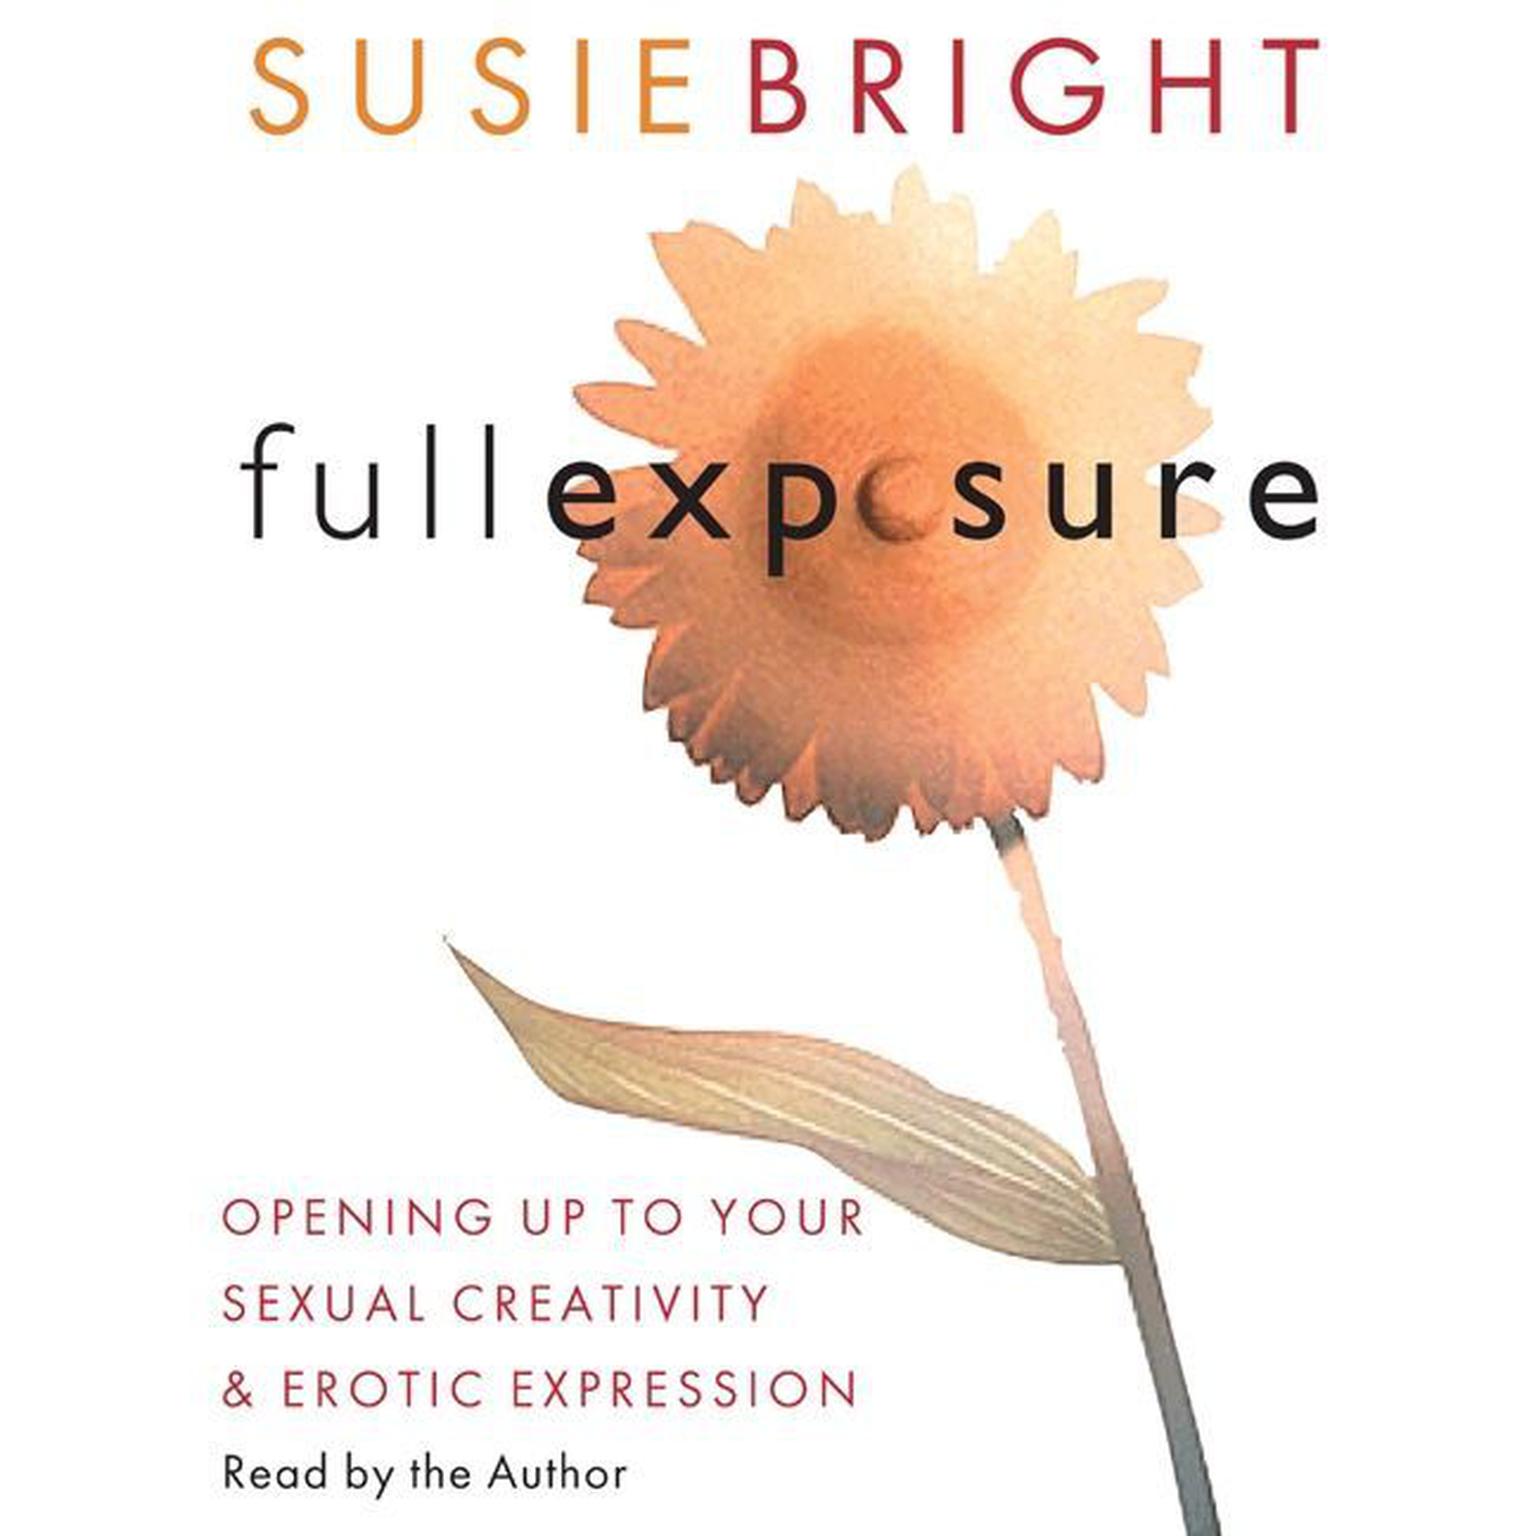 Full Exposure (Abridged): Opening up to Your Sexual Creativity and Erotic Expression Audiobook, by Susie Bright